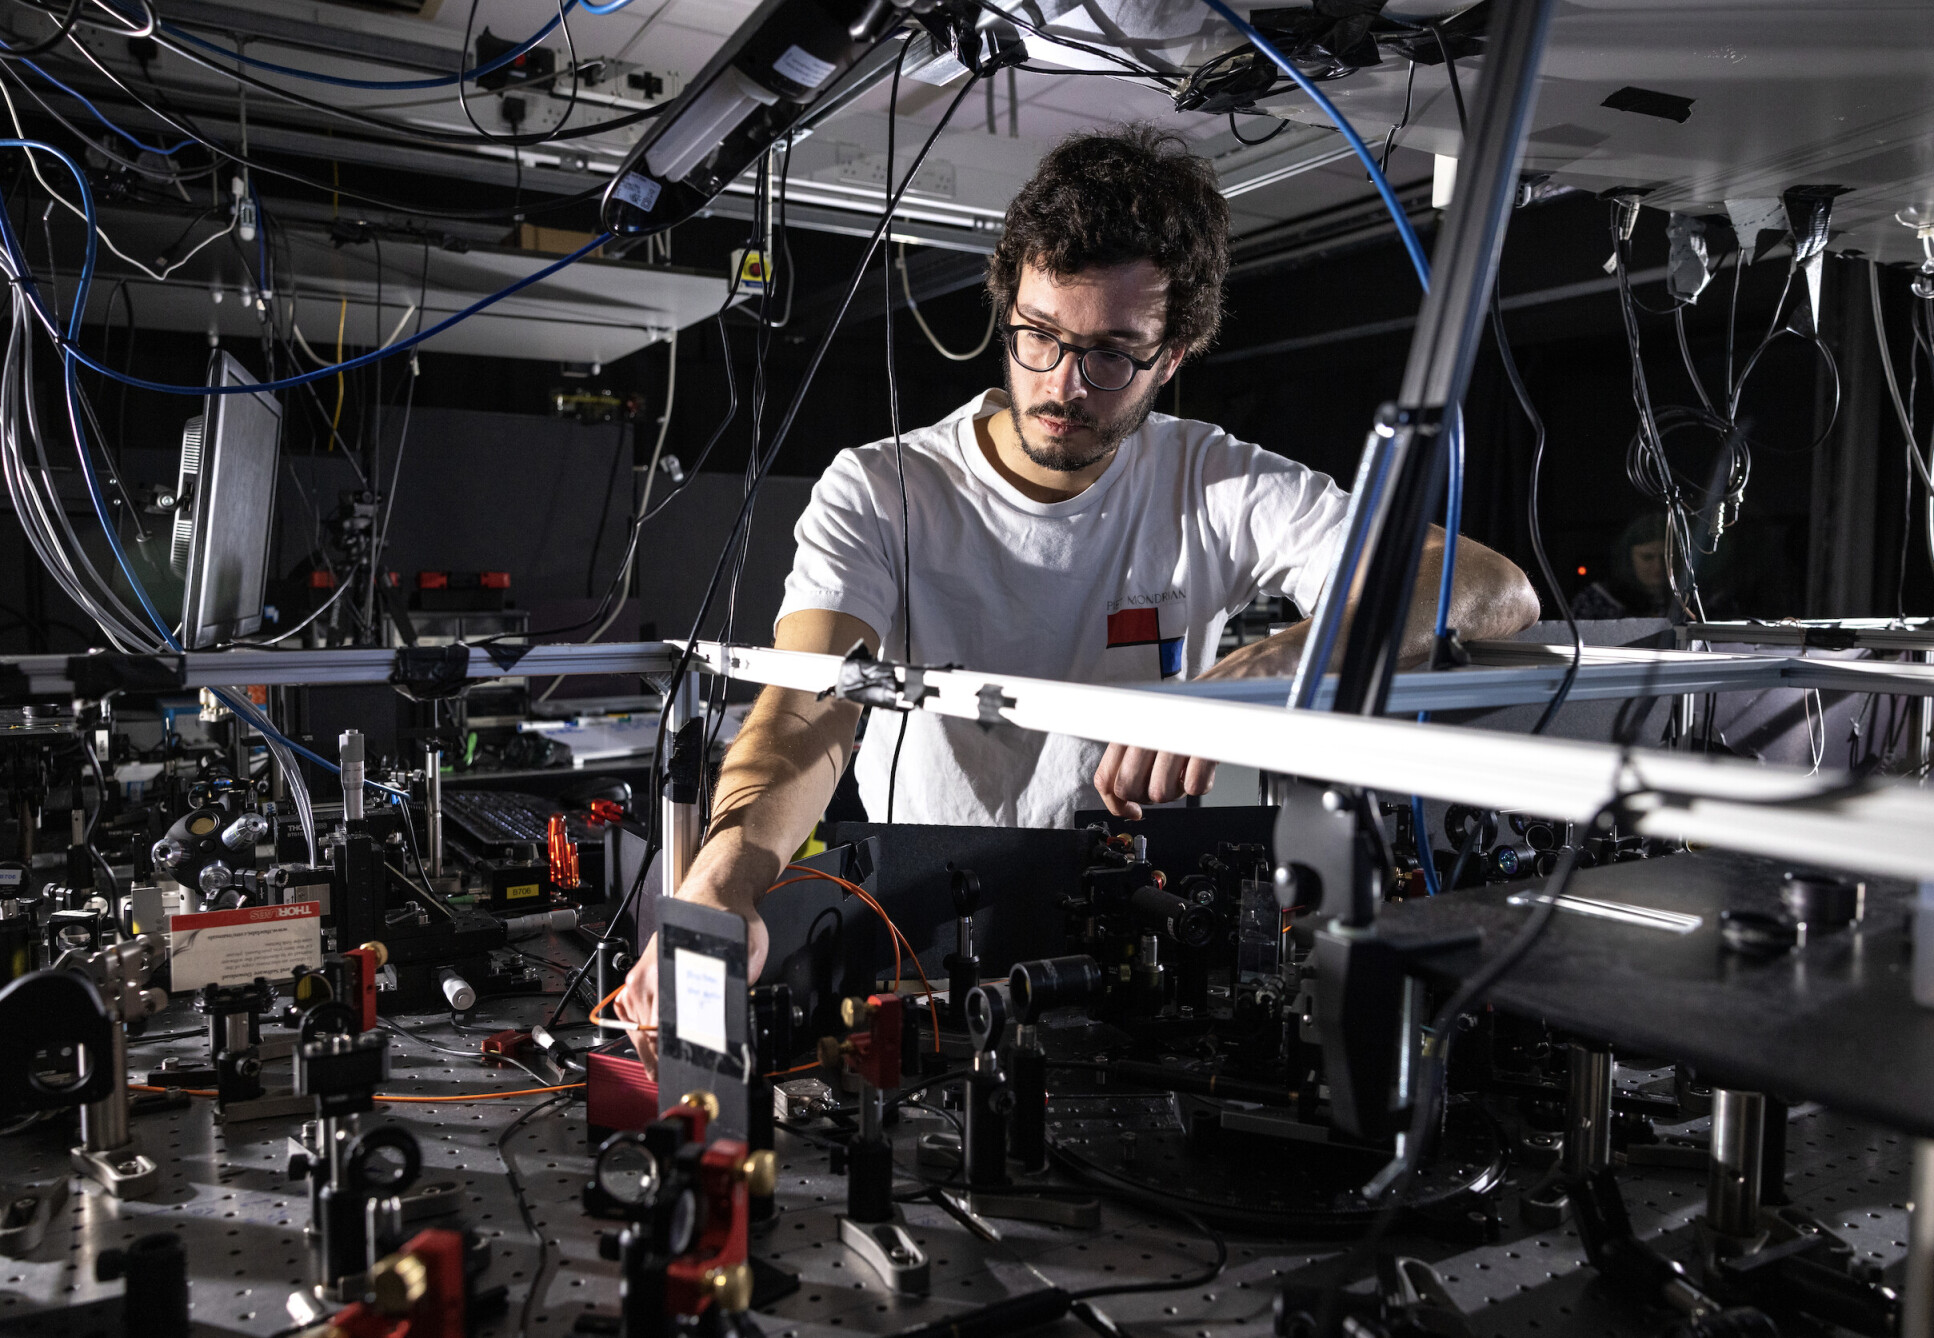 Romain Tirole, a PhD student in the Complex Nanophotonics Research Group, is controlling complex nanolasers in the ultrafast plasmonics lab.